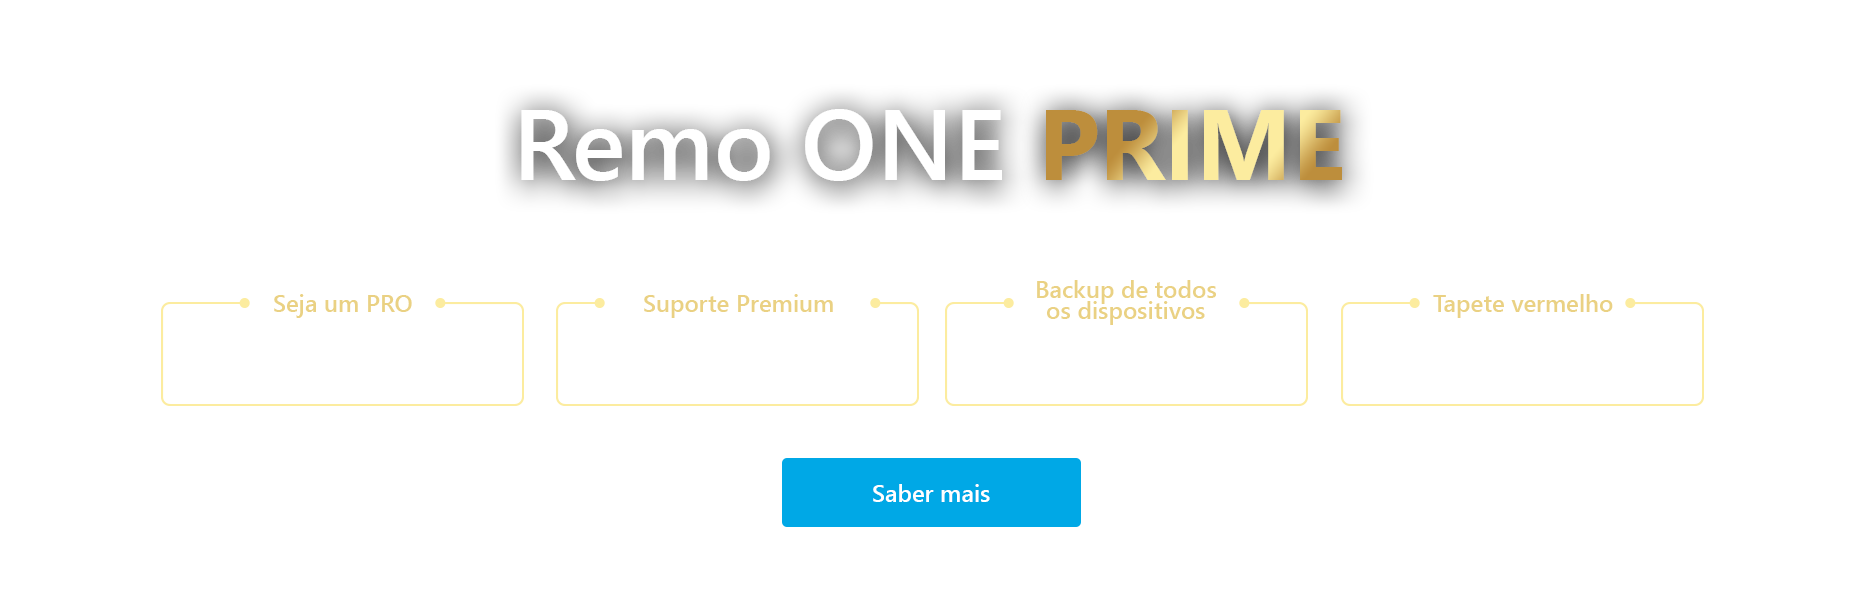 Remo ONE